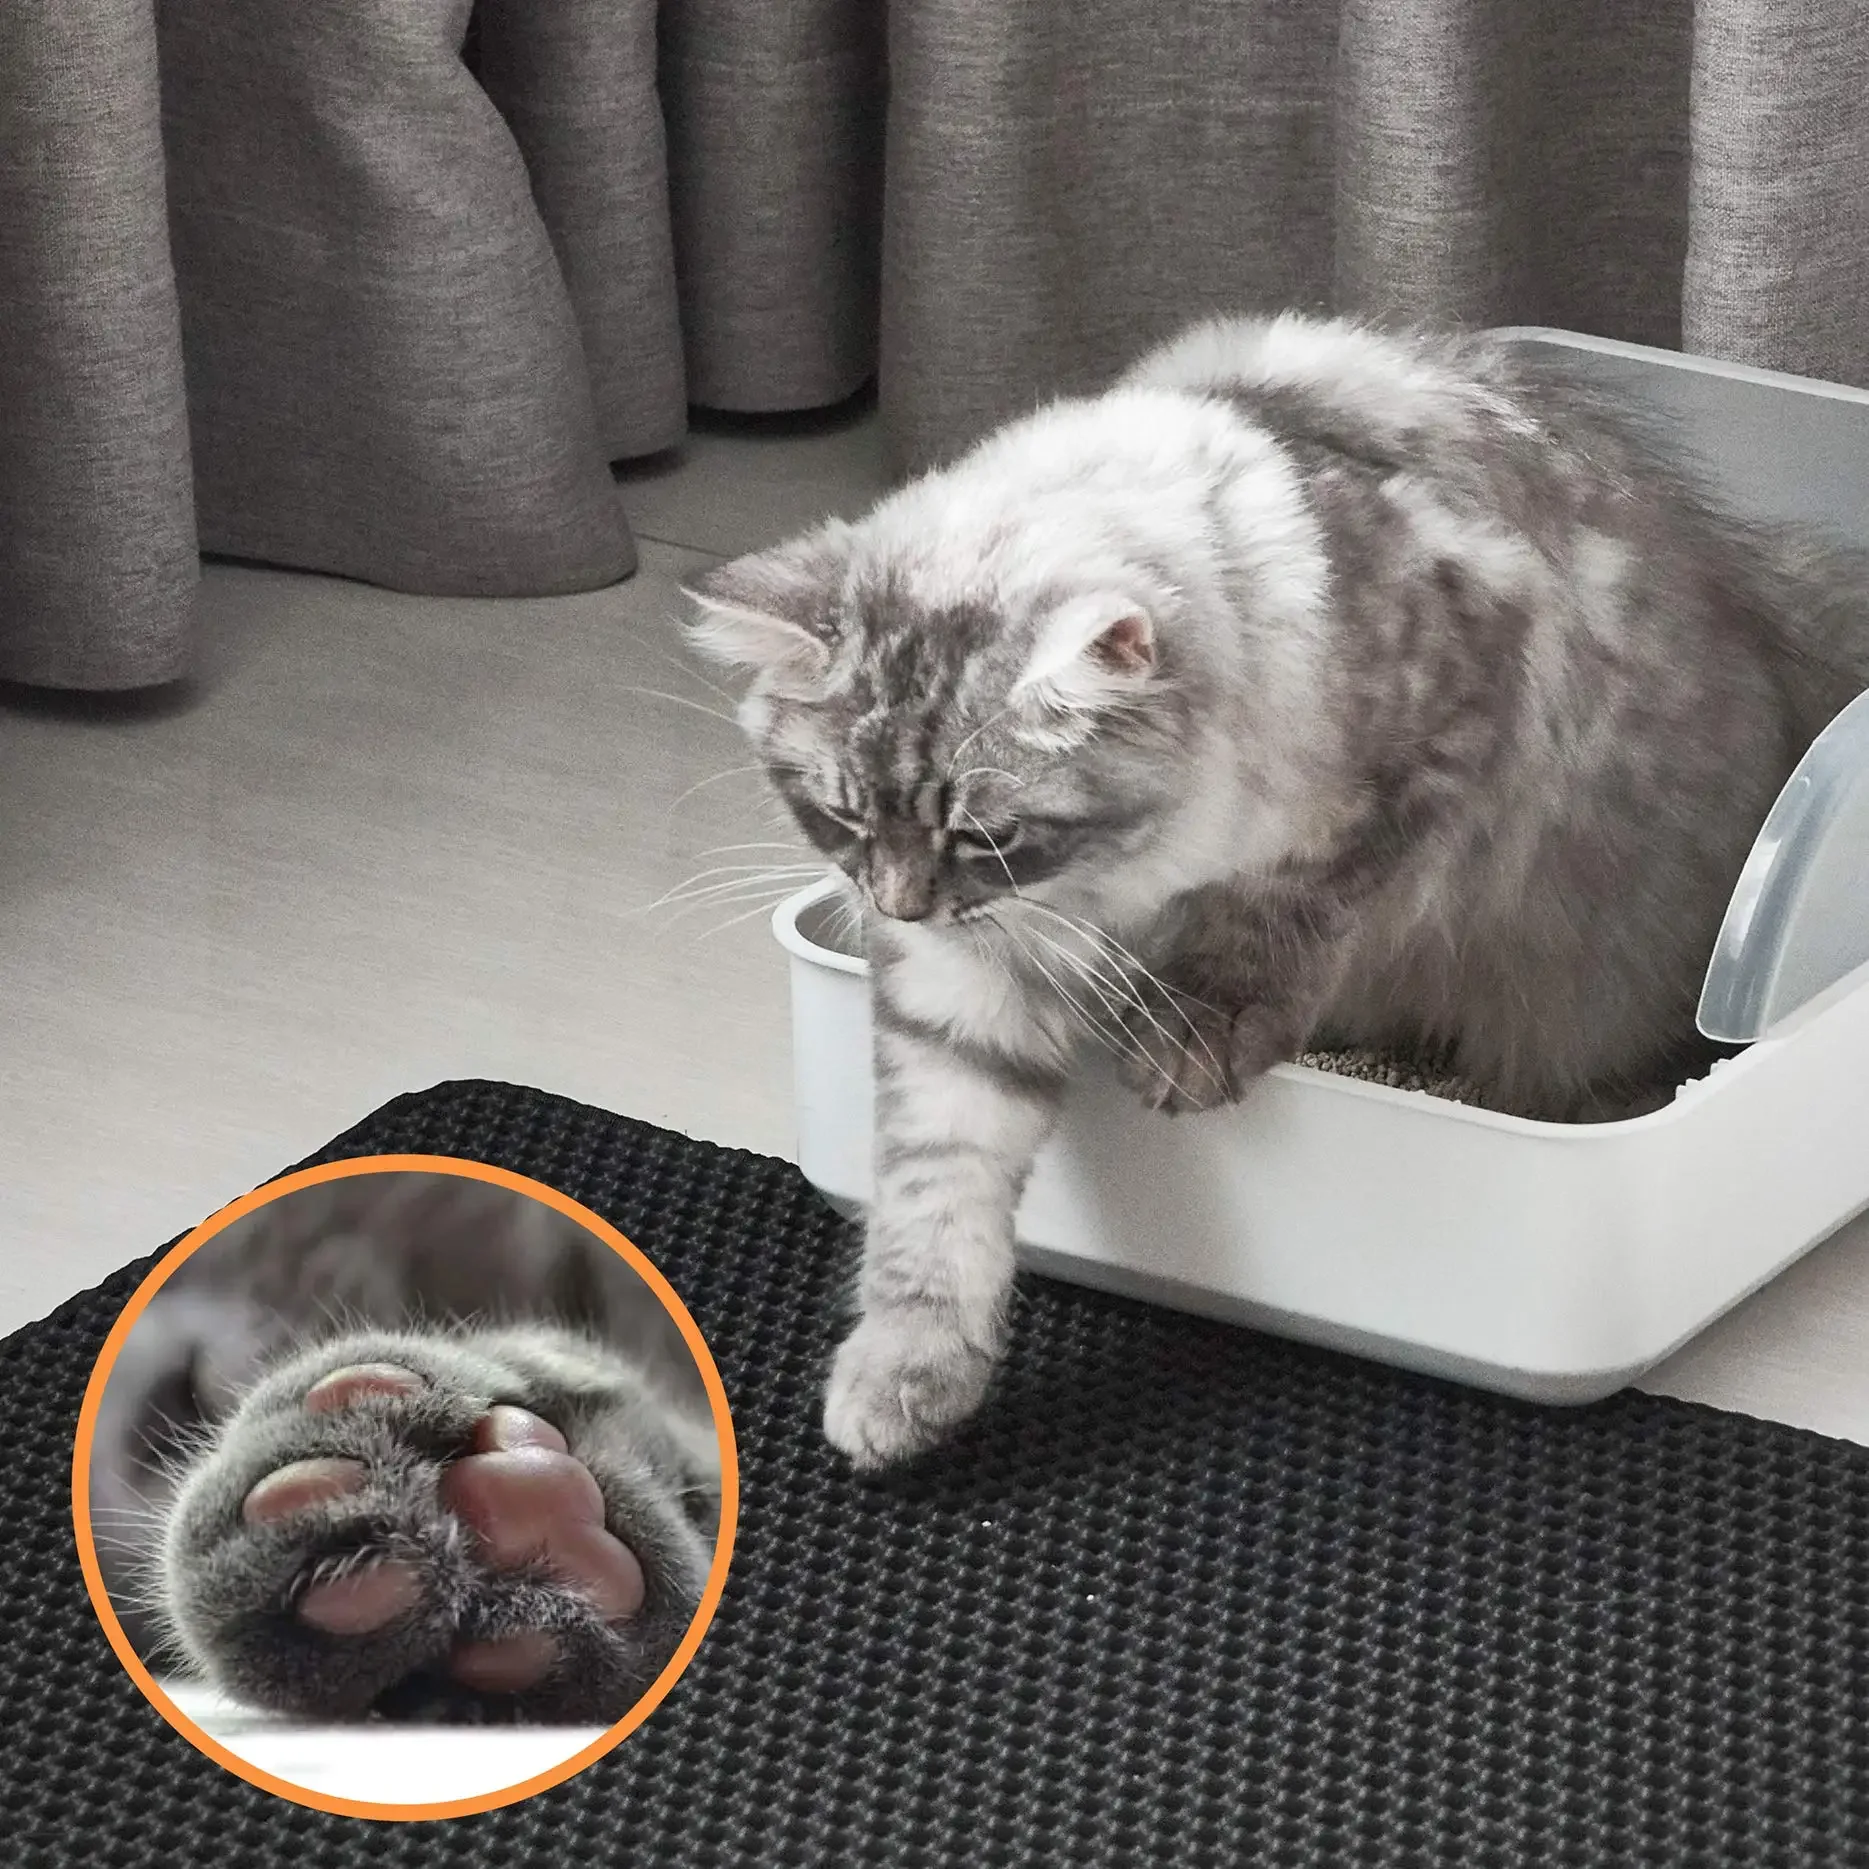 https://ae01.alicdn.com/kf/Saf387a36a01f4edf8d329fb1dbaa9a1dD/Cat-Litter-Mat-Honeycomb-Double-Layer-Design-Urine-and-Water-Proof-Material-Scatter-Control-Easier-Clean.jpg